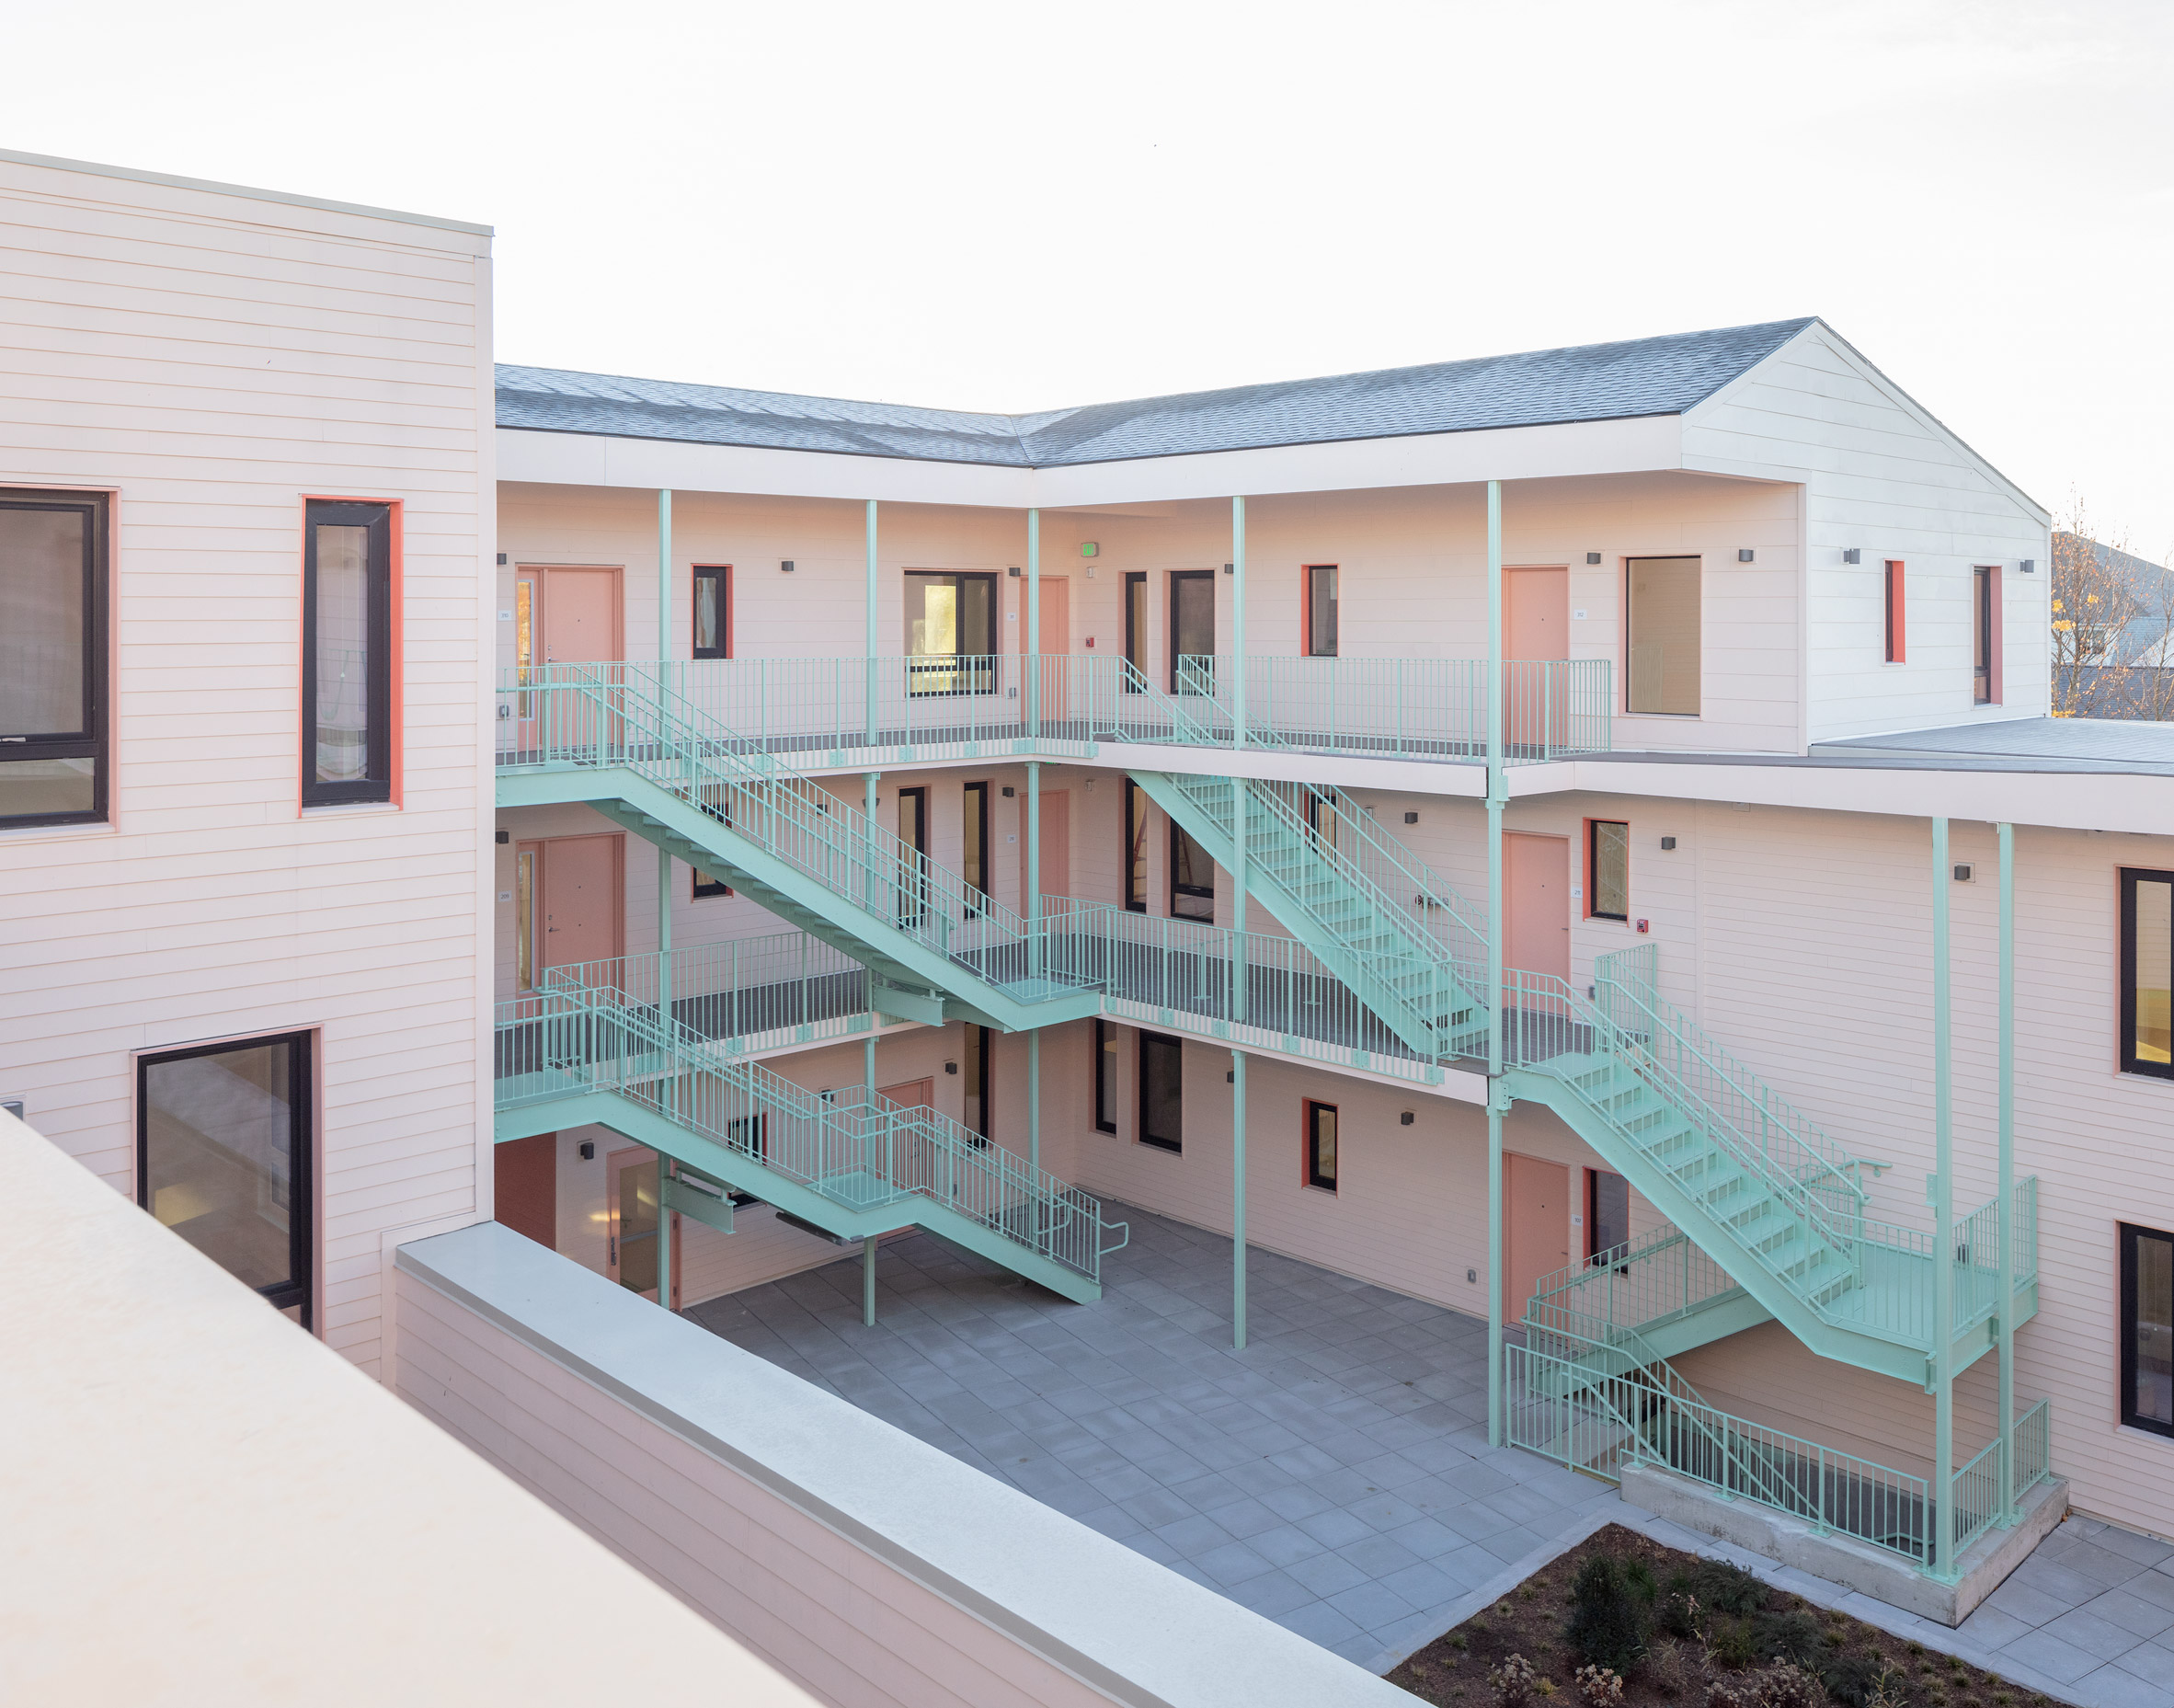 Co-housing complex with pale pink walls